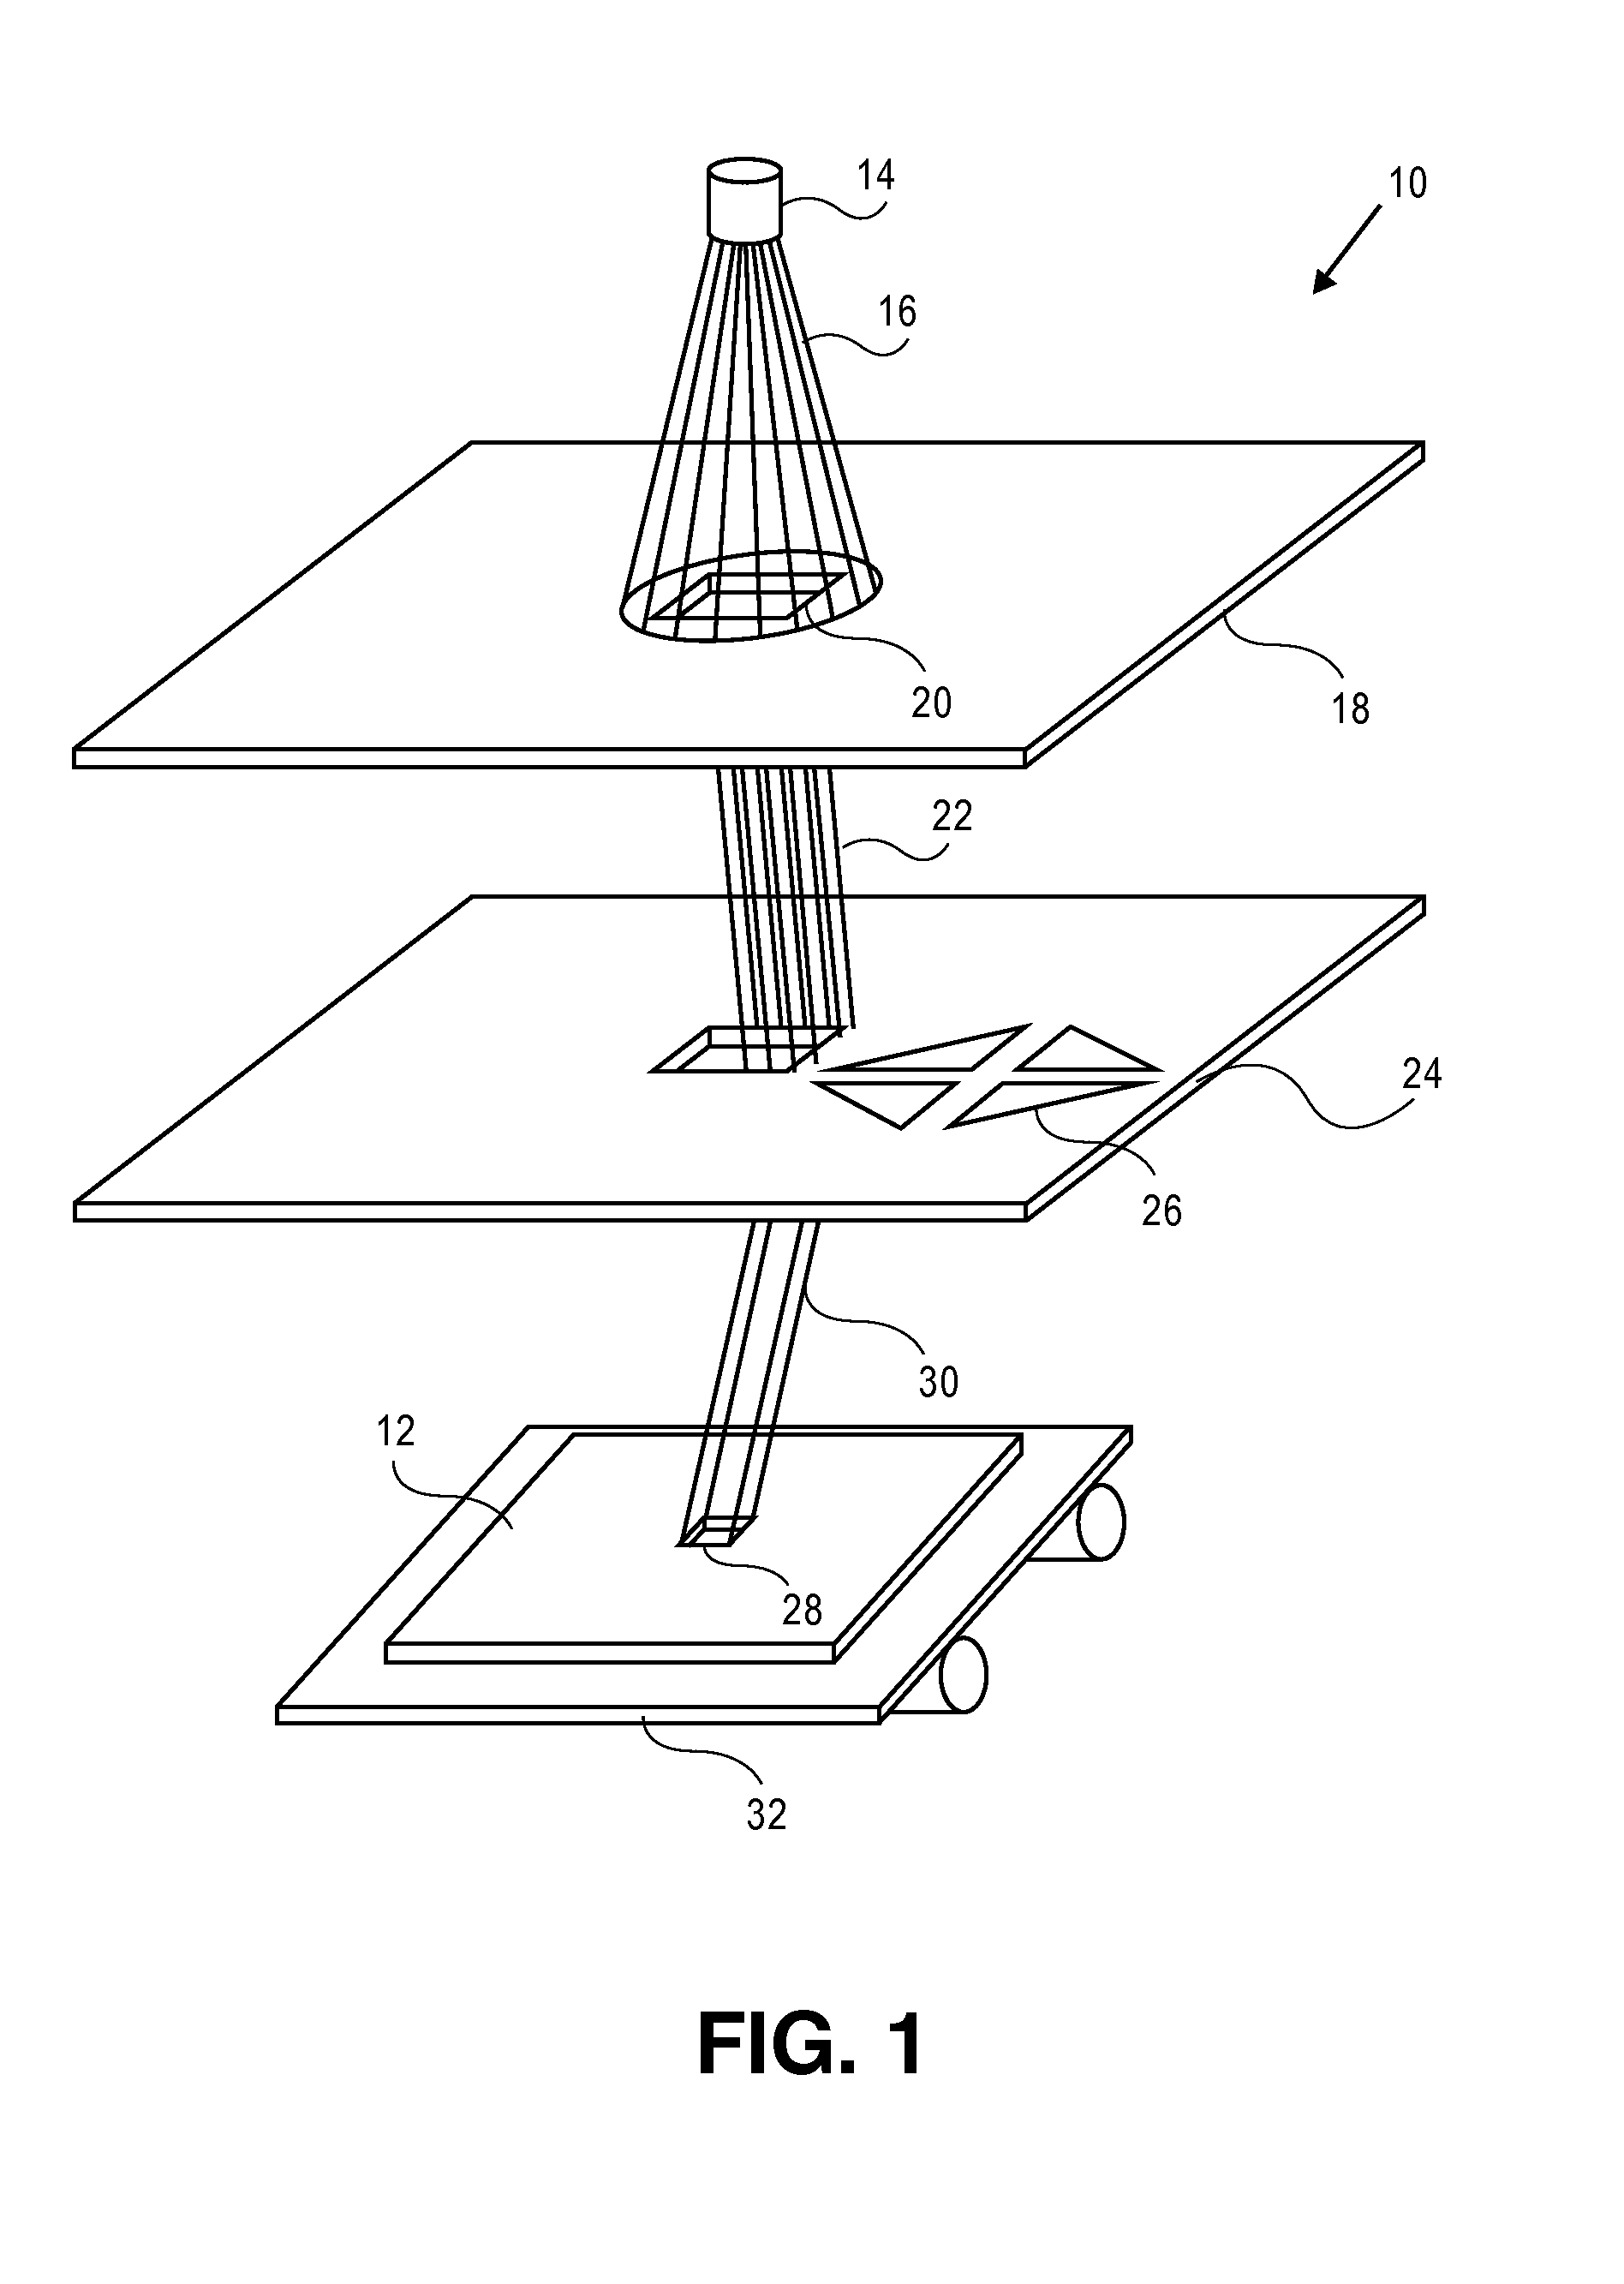 Method for manufacturing a surface and integrated circuit using variable shaped beam lithography